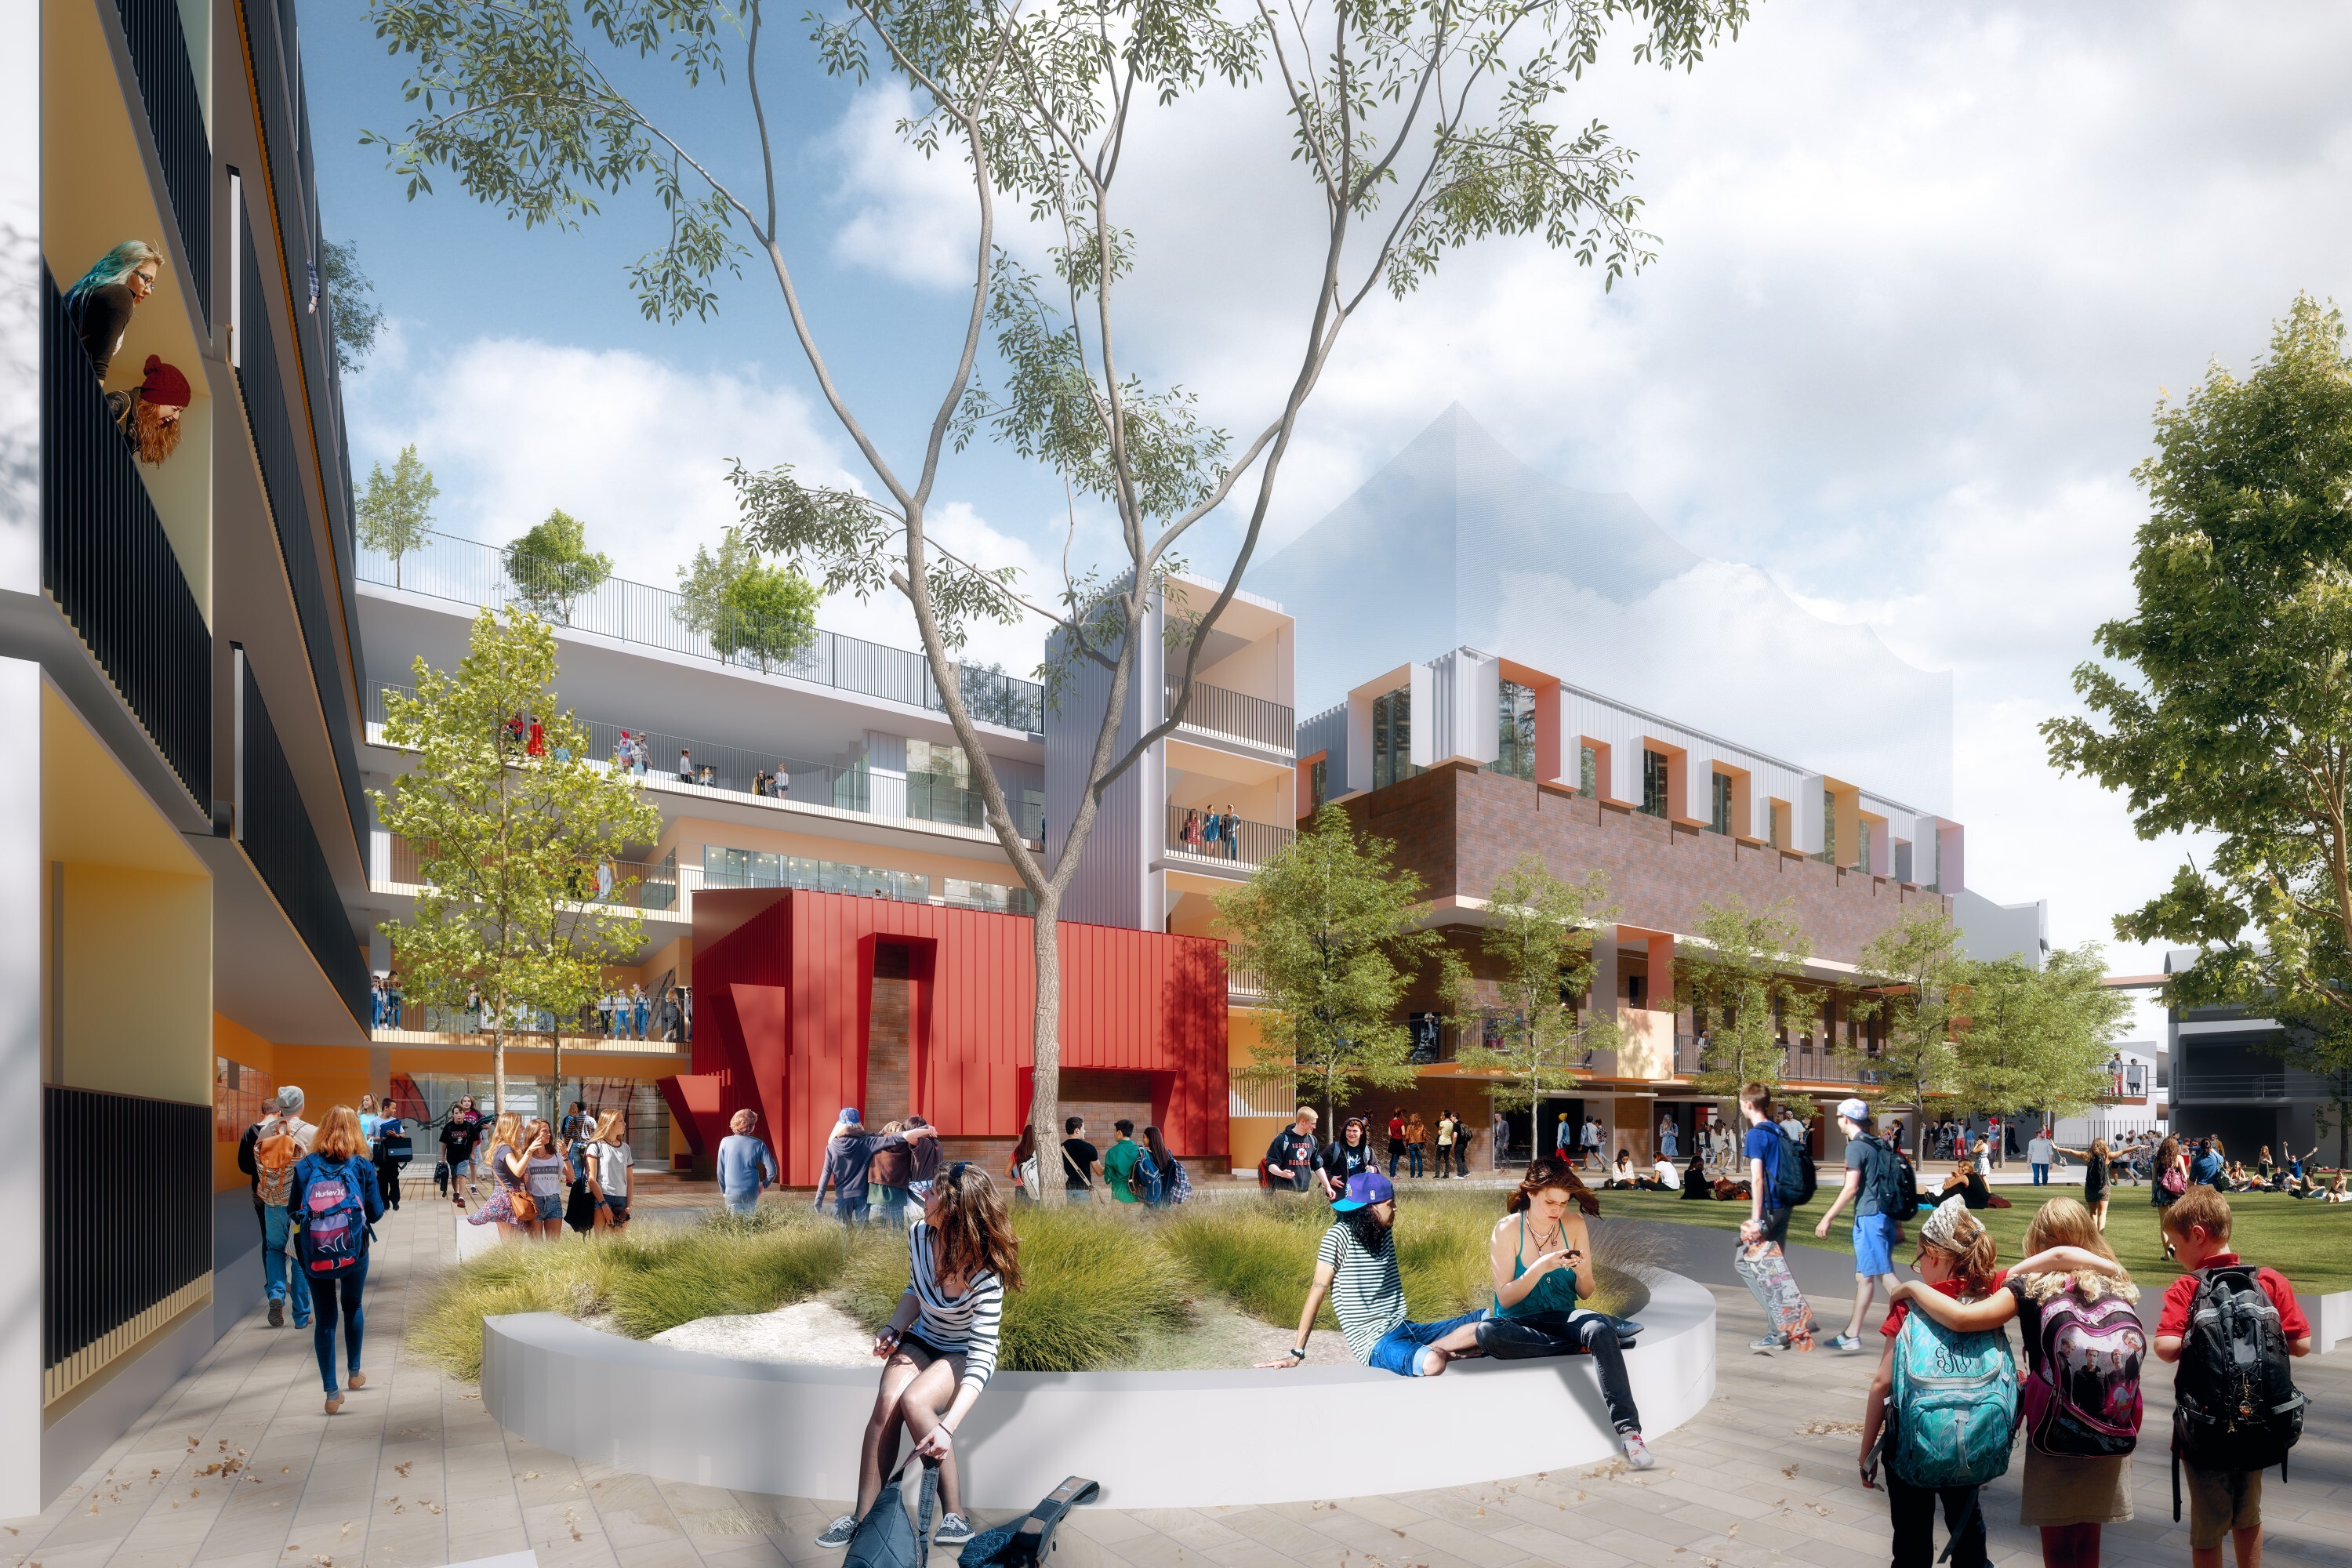 Work kicks off on newly approved major upgrade of Mosman High